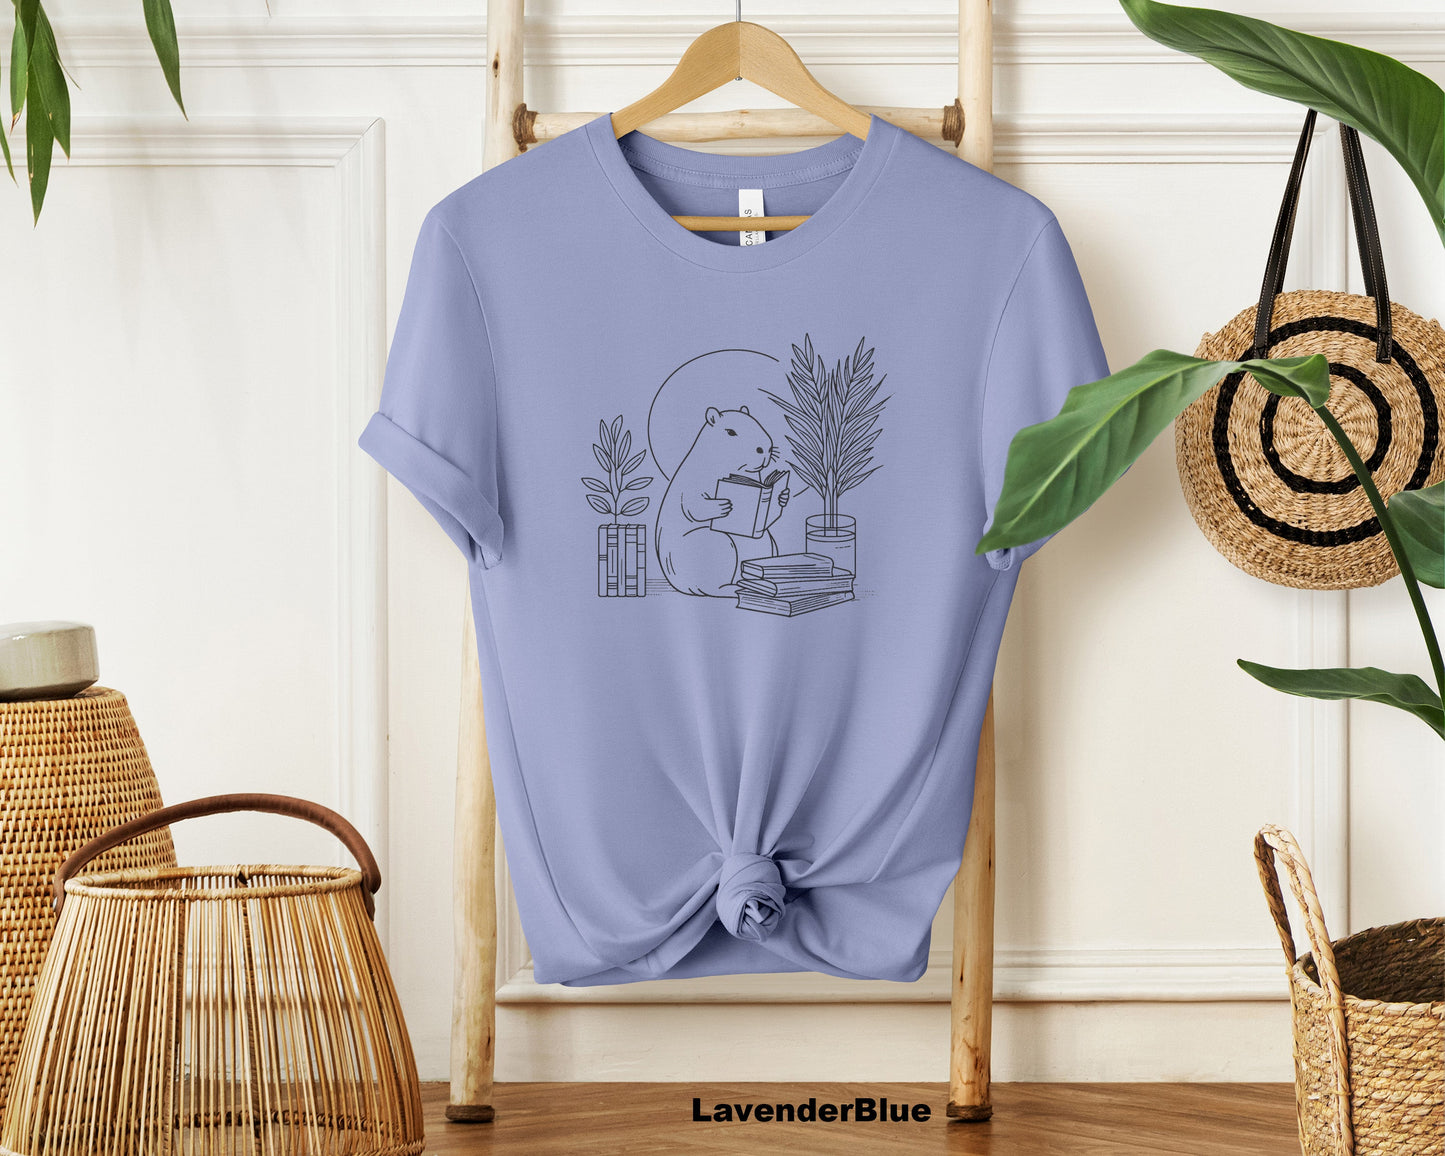 "Cute Capybara Bookworm Unisex Soft Cotton T-shirt for Book and Animal Lovers"